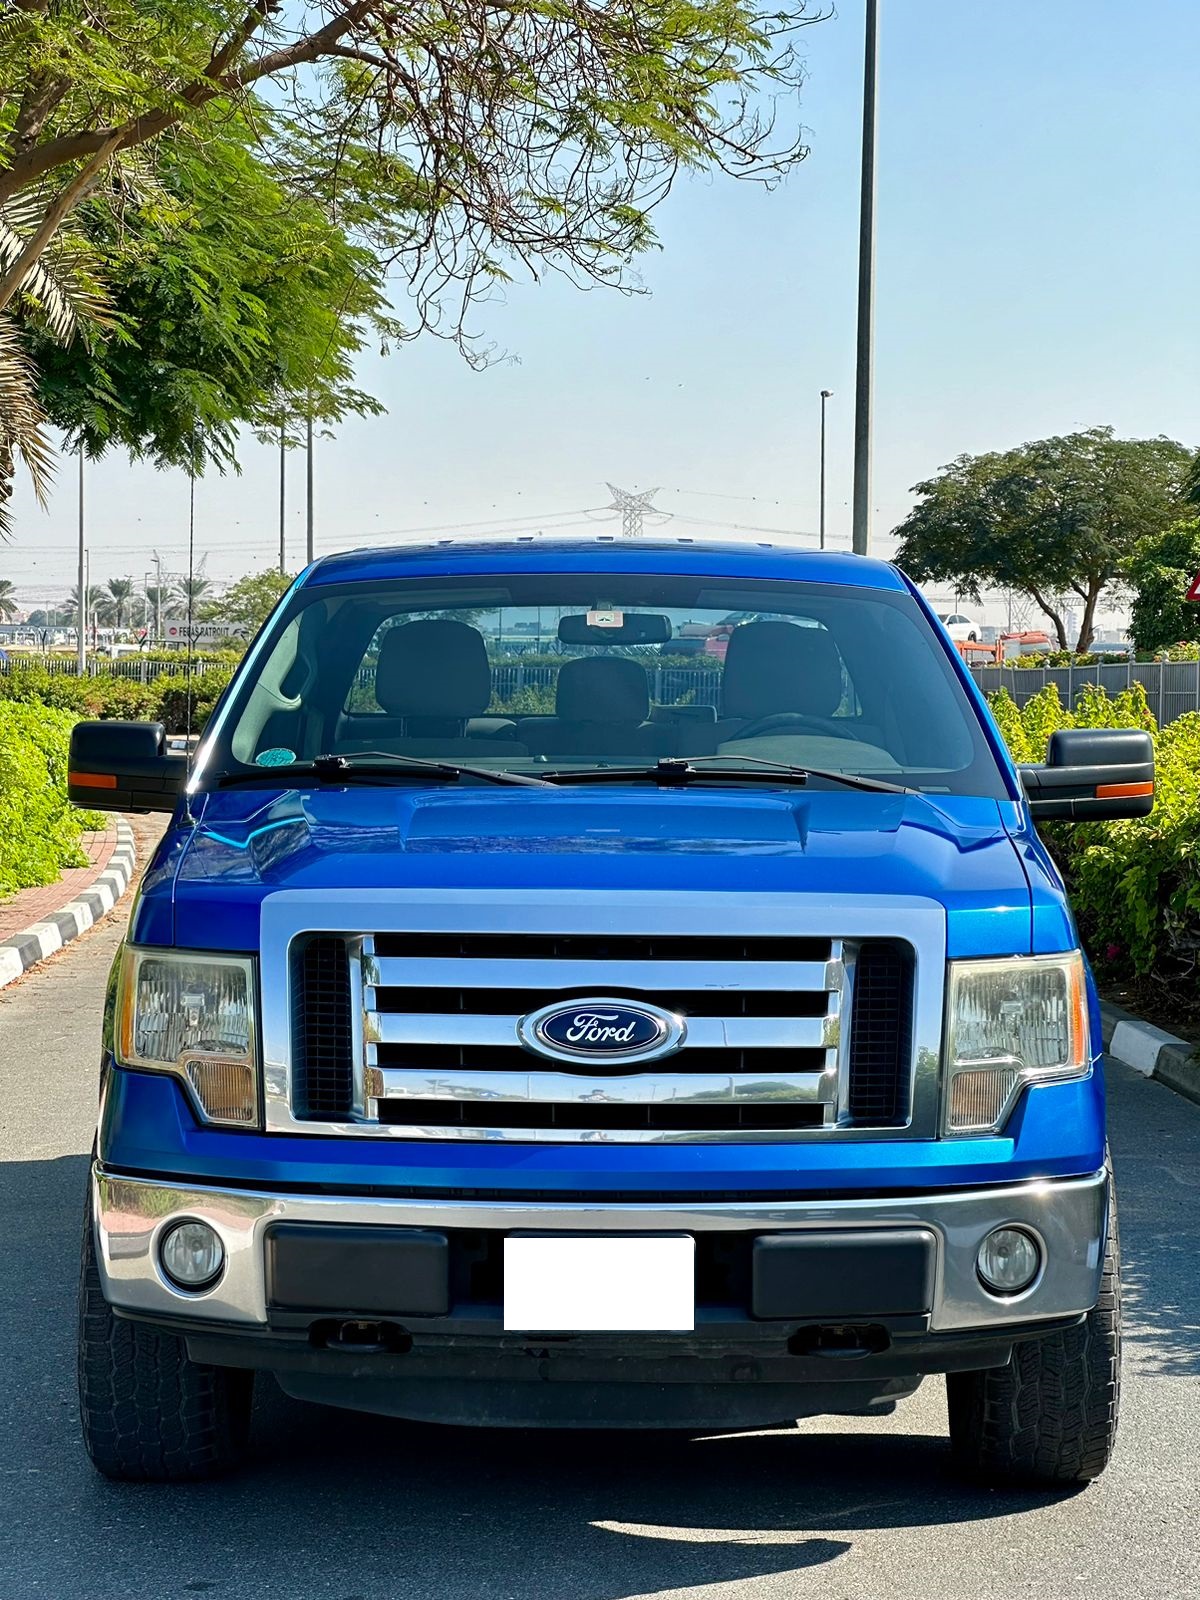 4WD F-150 /Mark LT (F6) 5.0L||GCC Specs ||Well Maintained Single